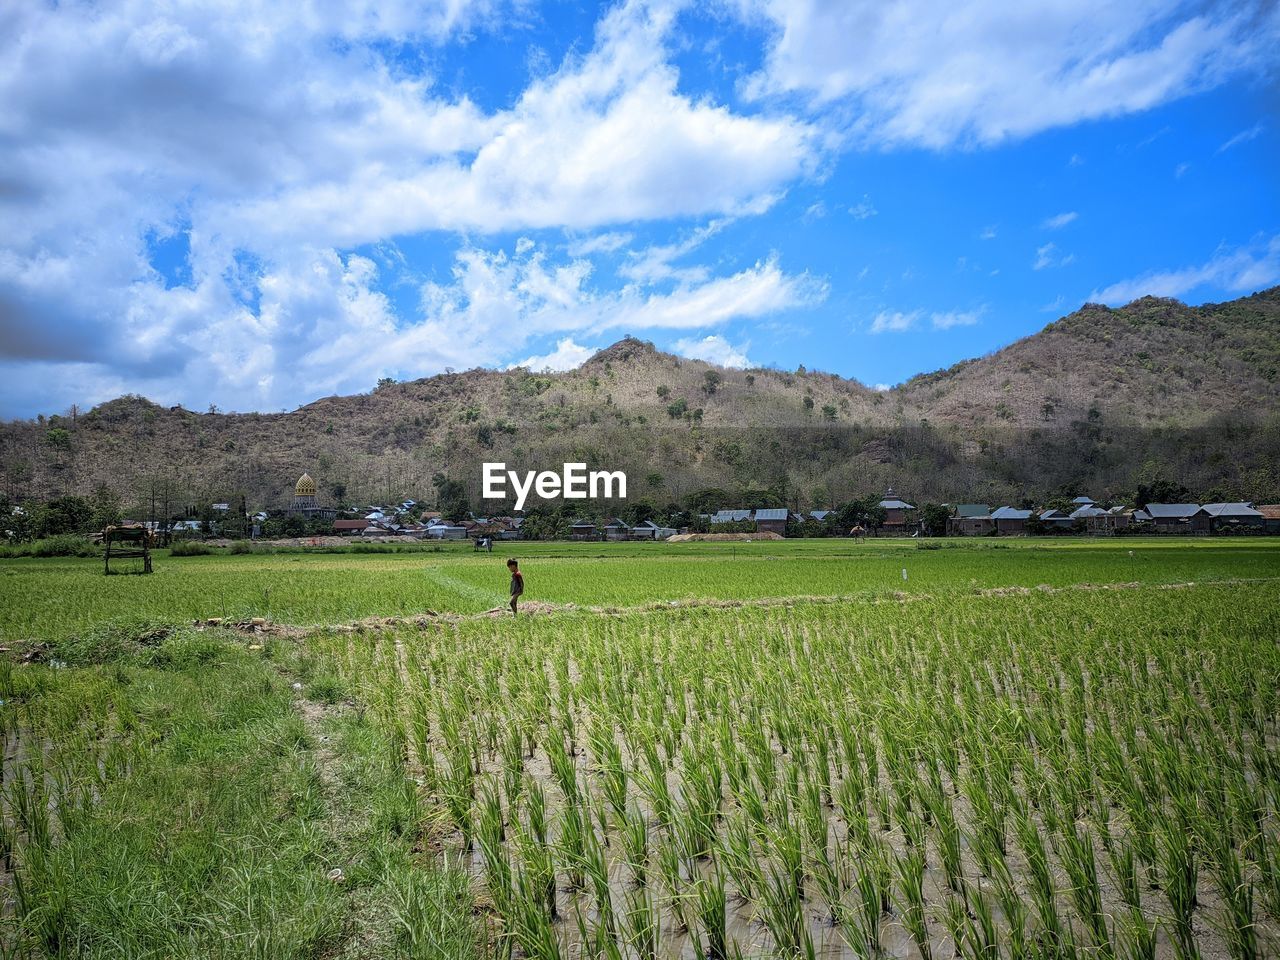 landscape, agriculture, land, environment, field, mountain, plant, rural scene, sky, scenics - nature, crop, nature, farm, grass, paddy field, plain, rural area, grassland, meadow, food and drink, beauty in nature, food, growth, cloud, mountain range, green, pasture, rice, tree, cereal plant, outdoors, rice paddy, tranquility, no people, day, tranquil scene, horizon, prairie, occupation, soil, plateau, rice - food staple, valley, natural environment, social issues, travel, plantation, freshness